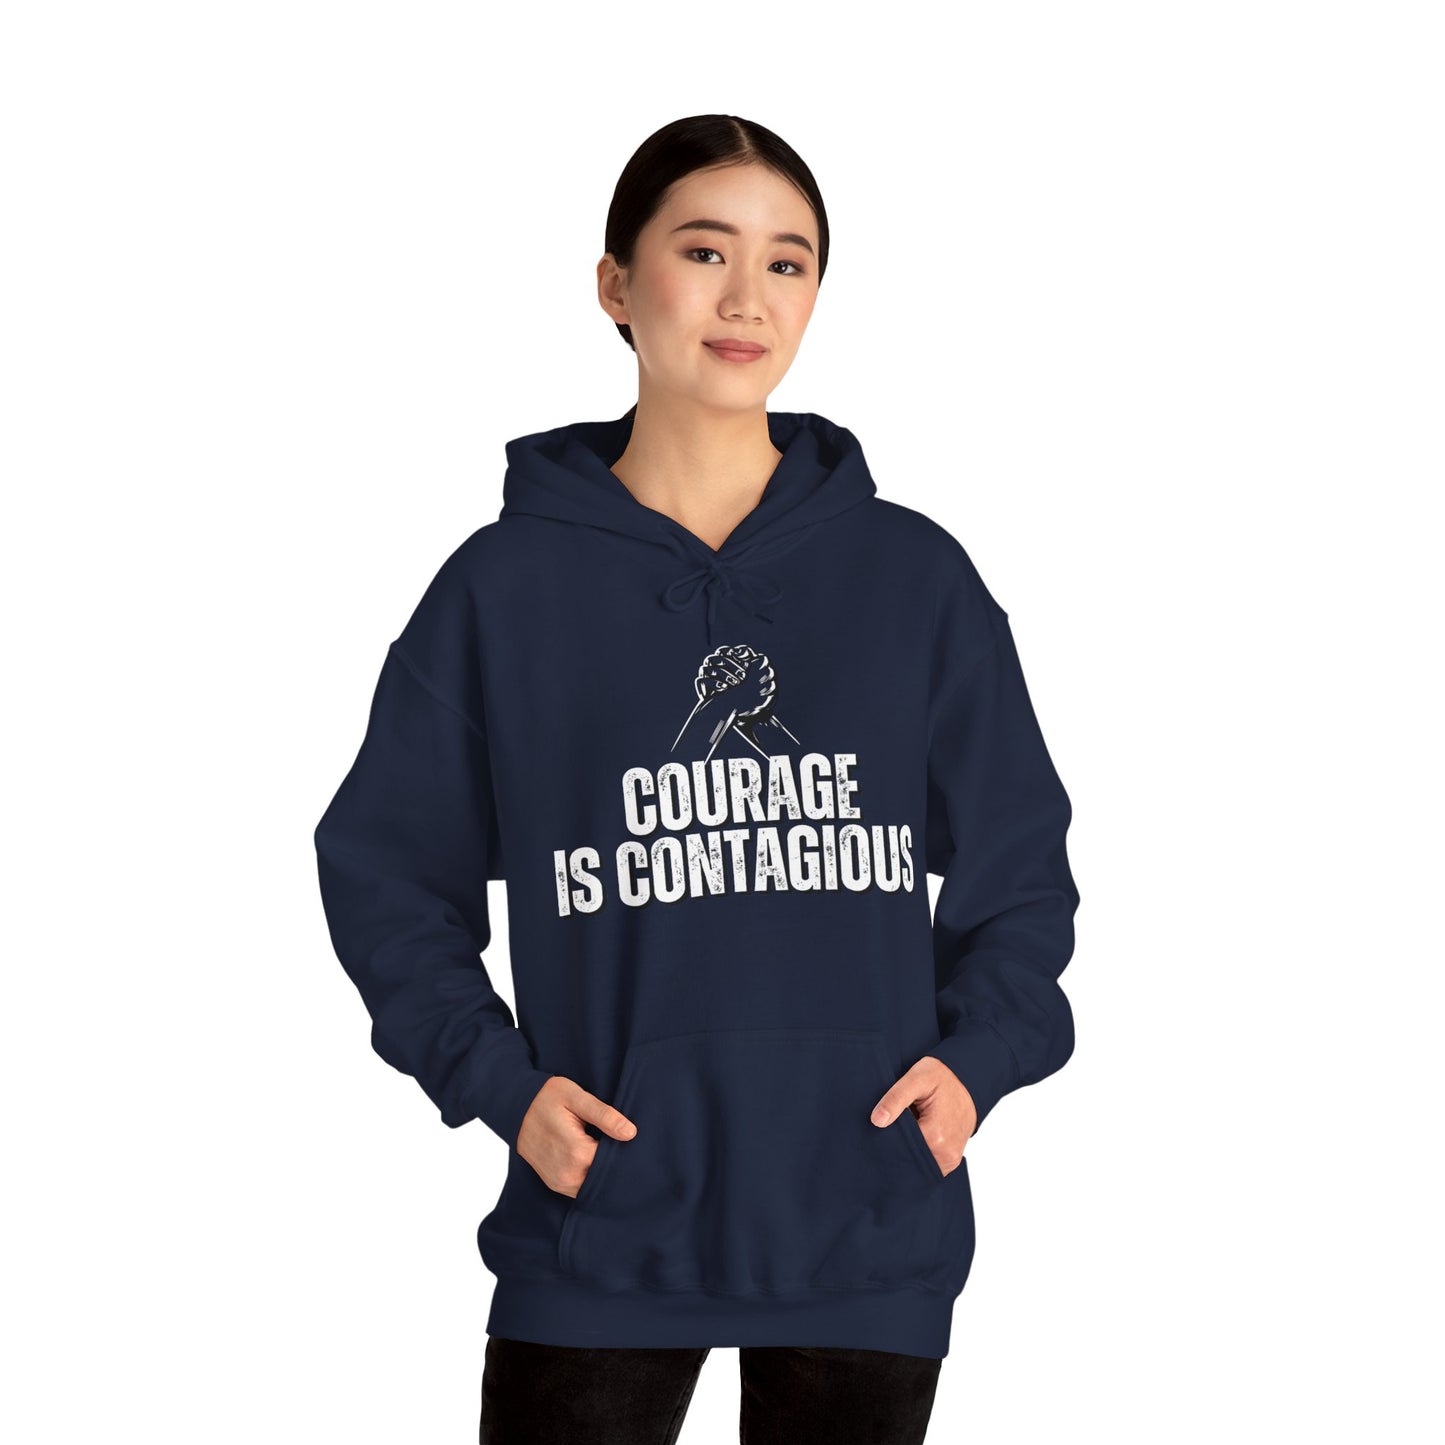 INSPIRED Women Courage is Contagious Heavy Blend Hooded Sweatshirt